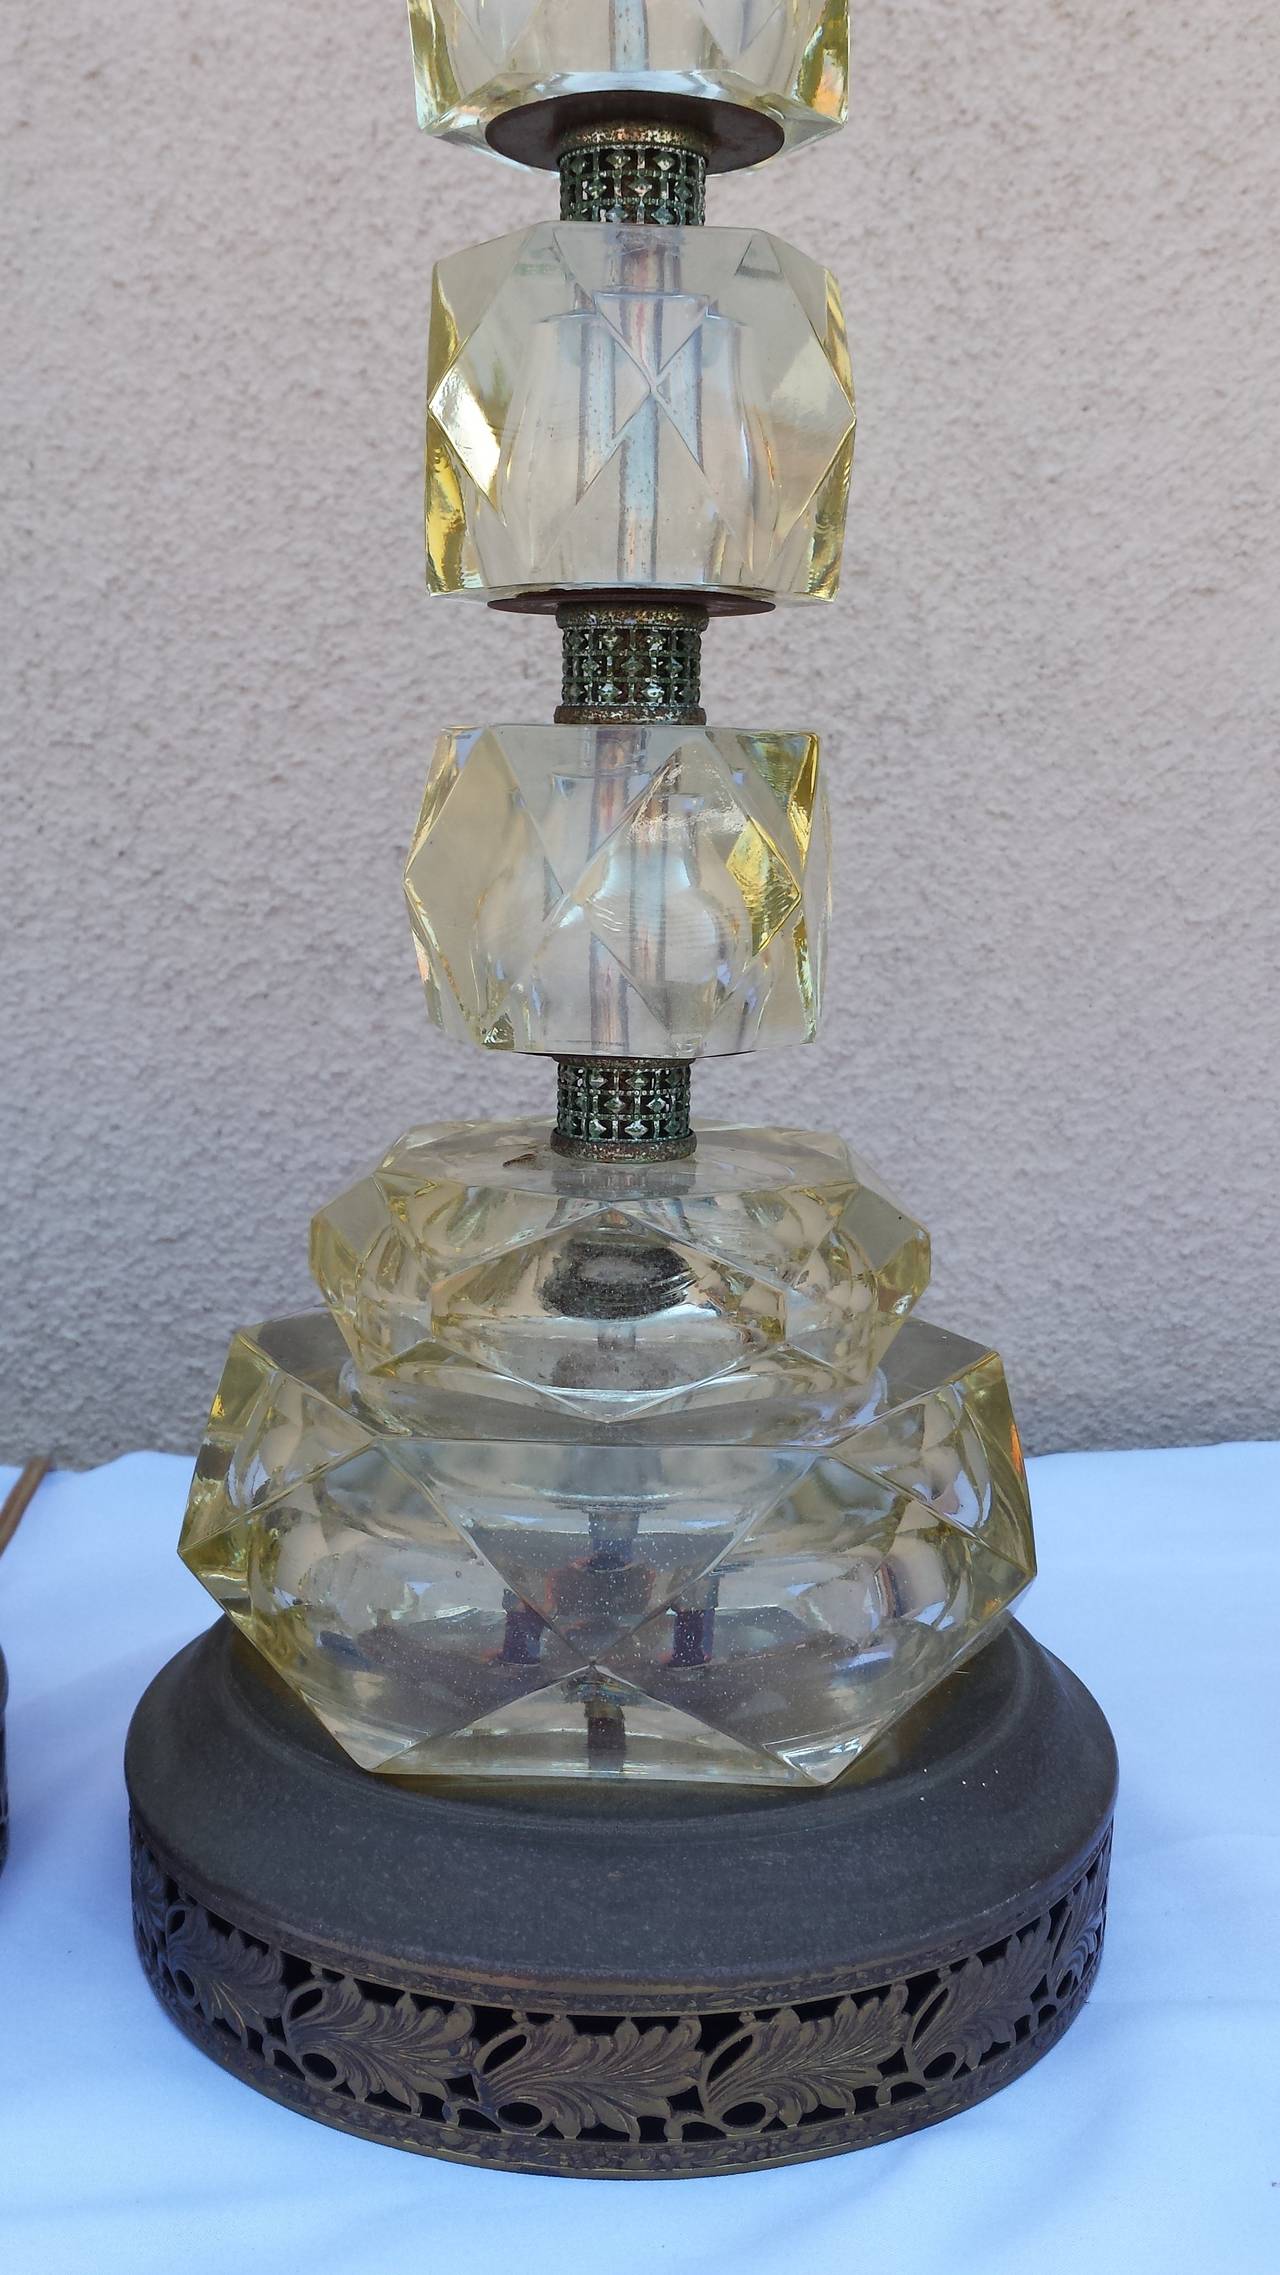 Beautiful pair of glass cut lamps. Big chunks of glass. The lamps are heavy and well crafted. With original adjustable harps.